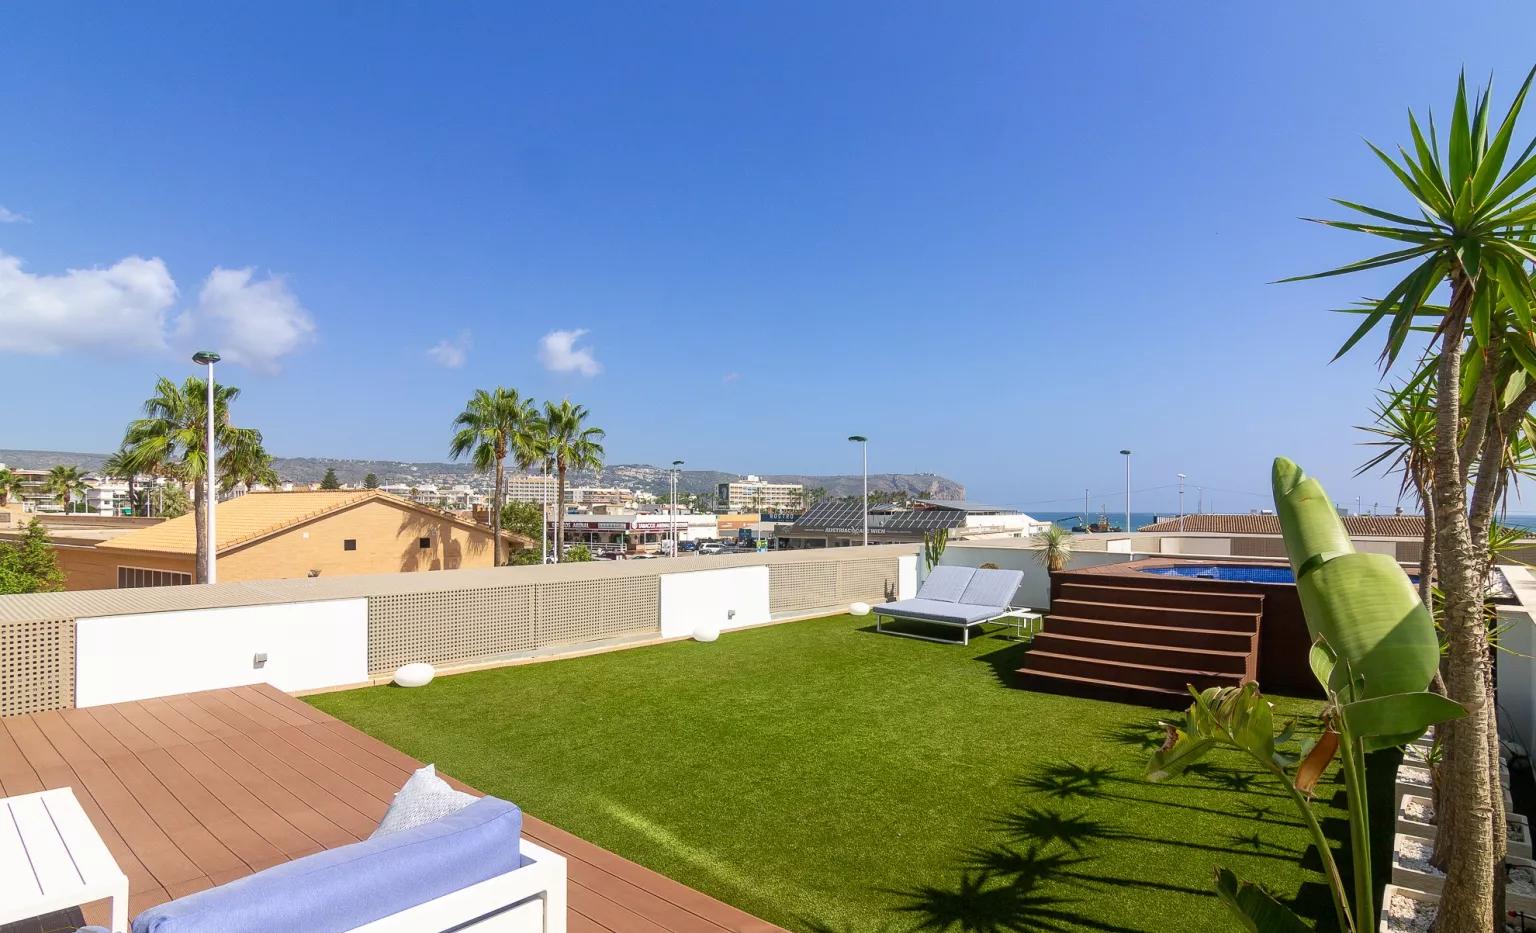 Apartment for Sale with Sea Views, Private Pool in Playa del Arenal - Javea